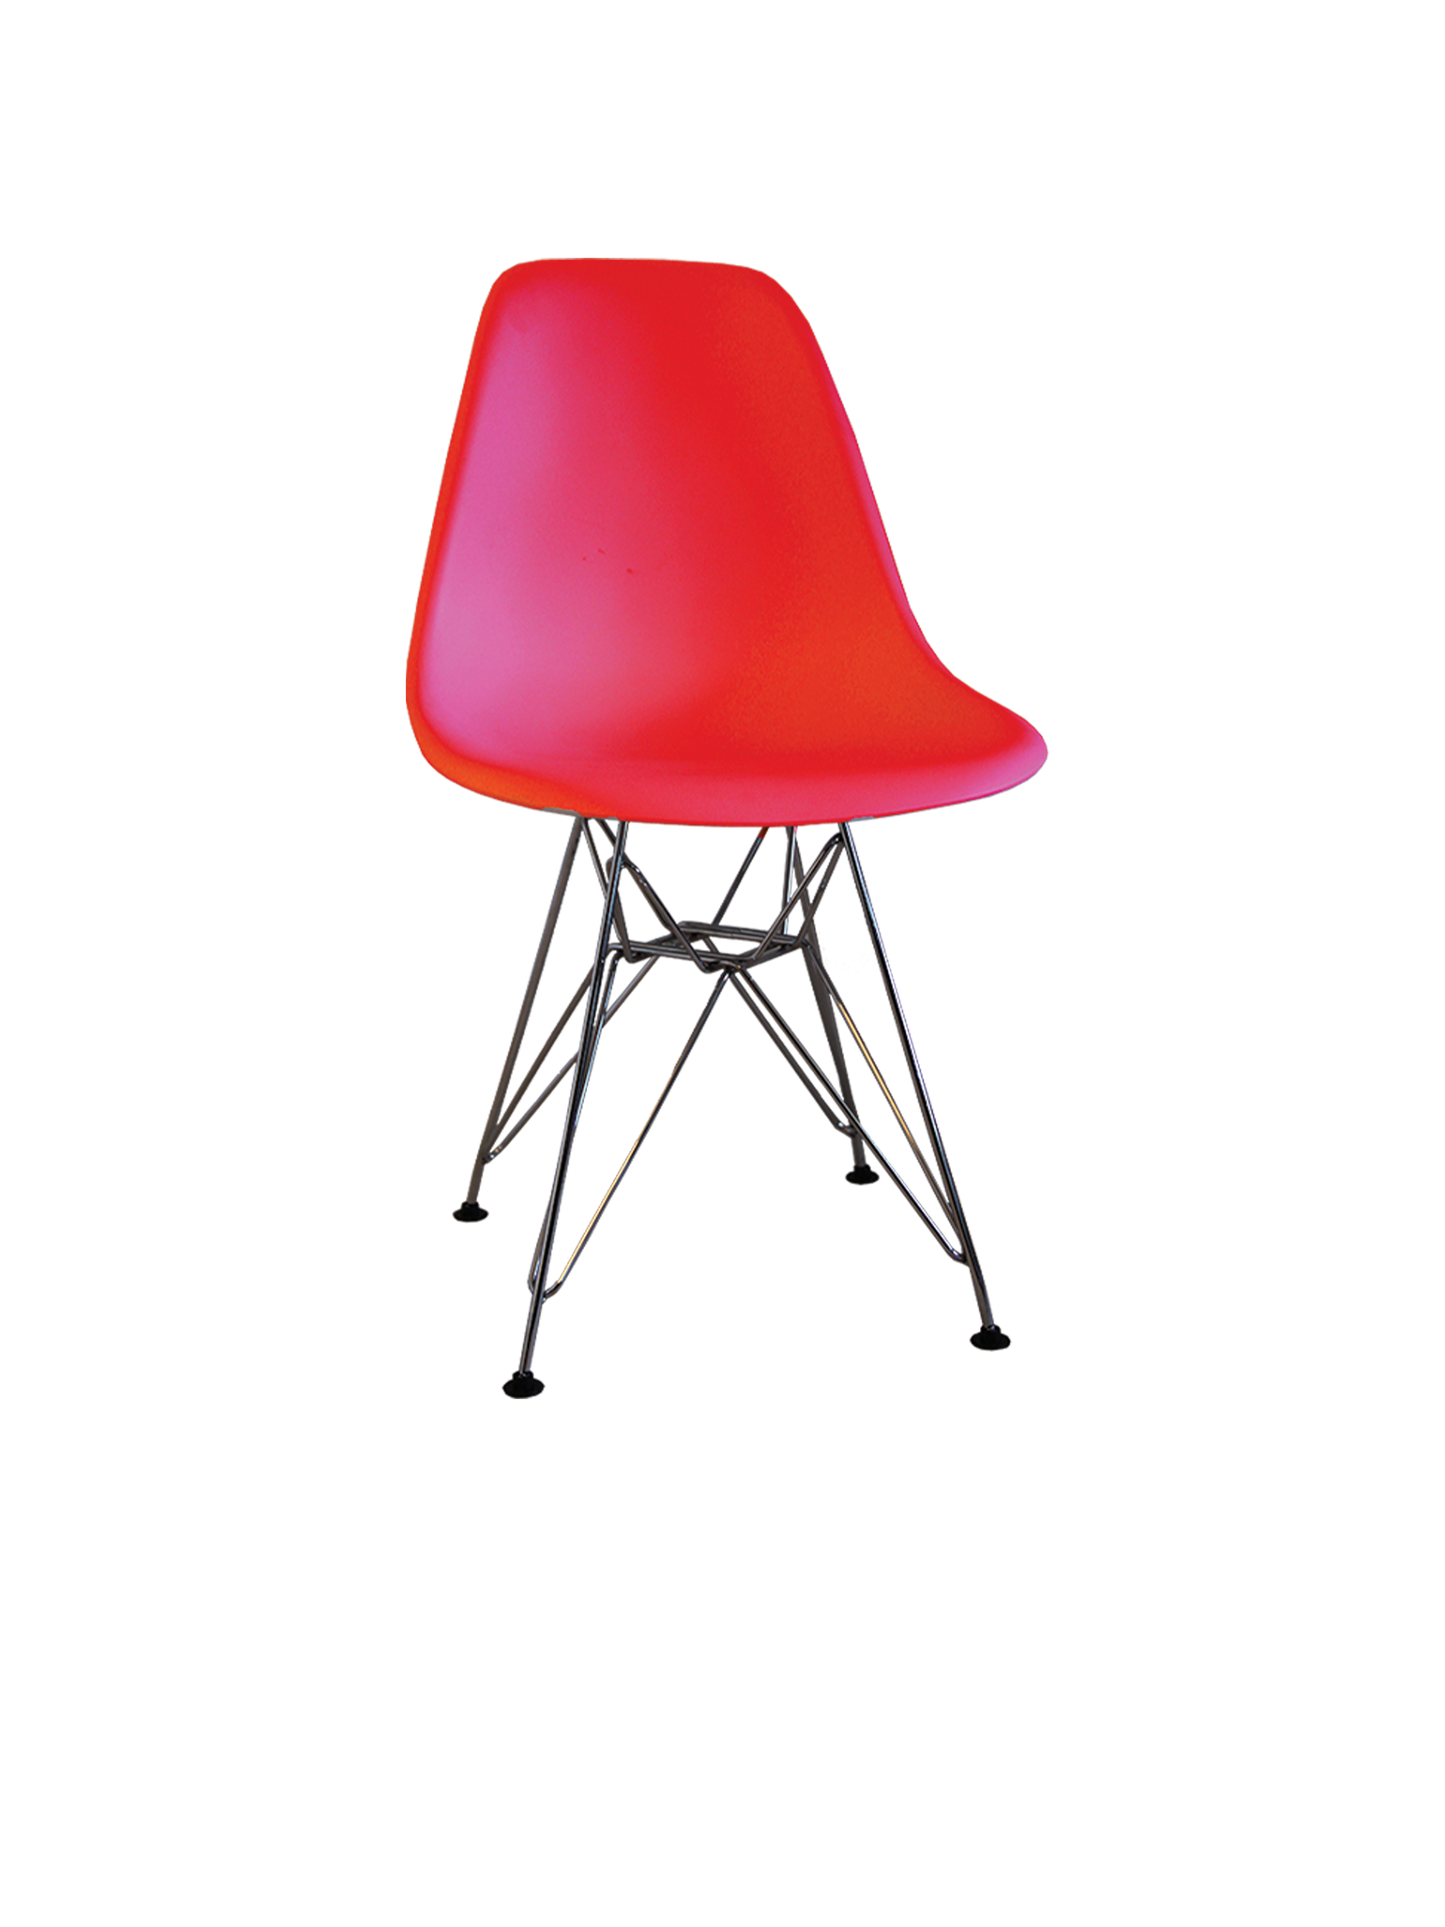 Chair 3002A Red